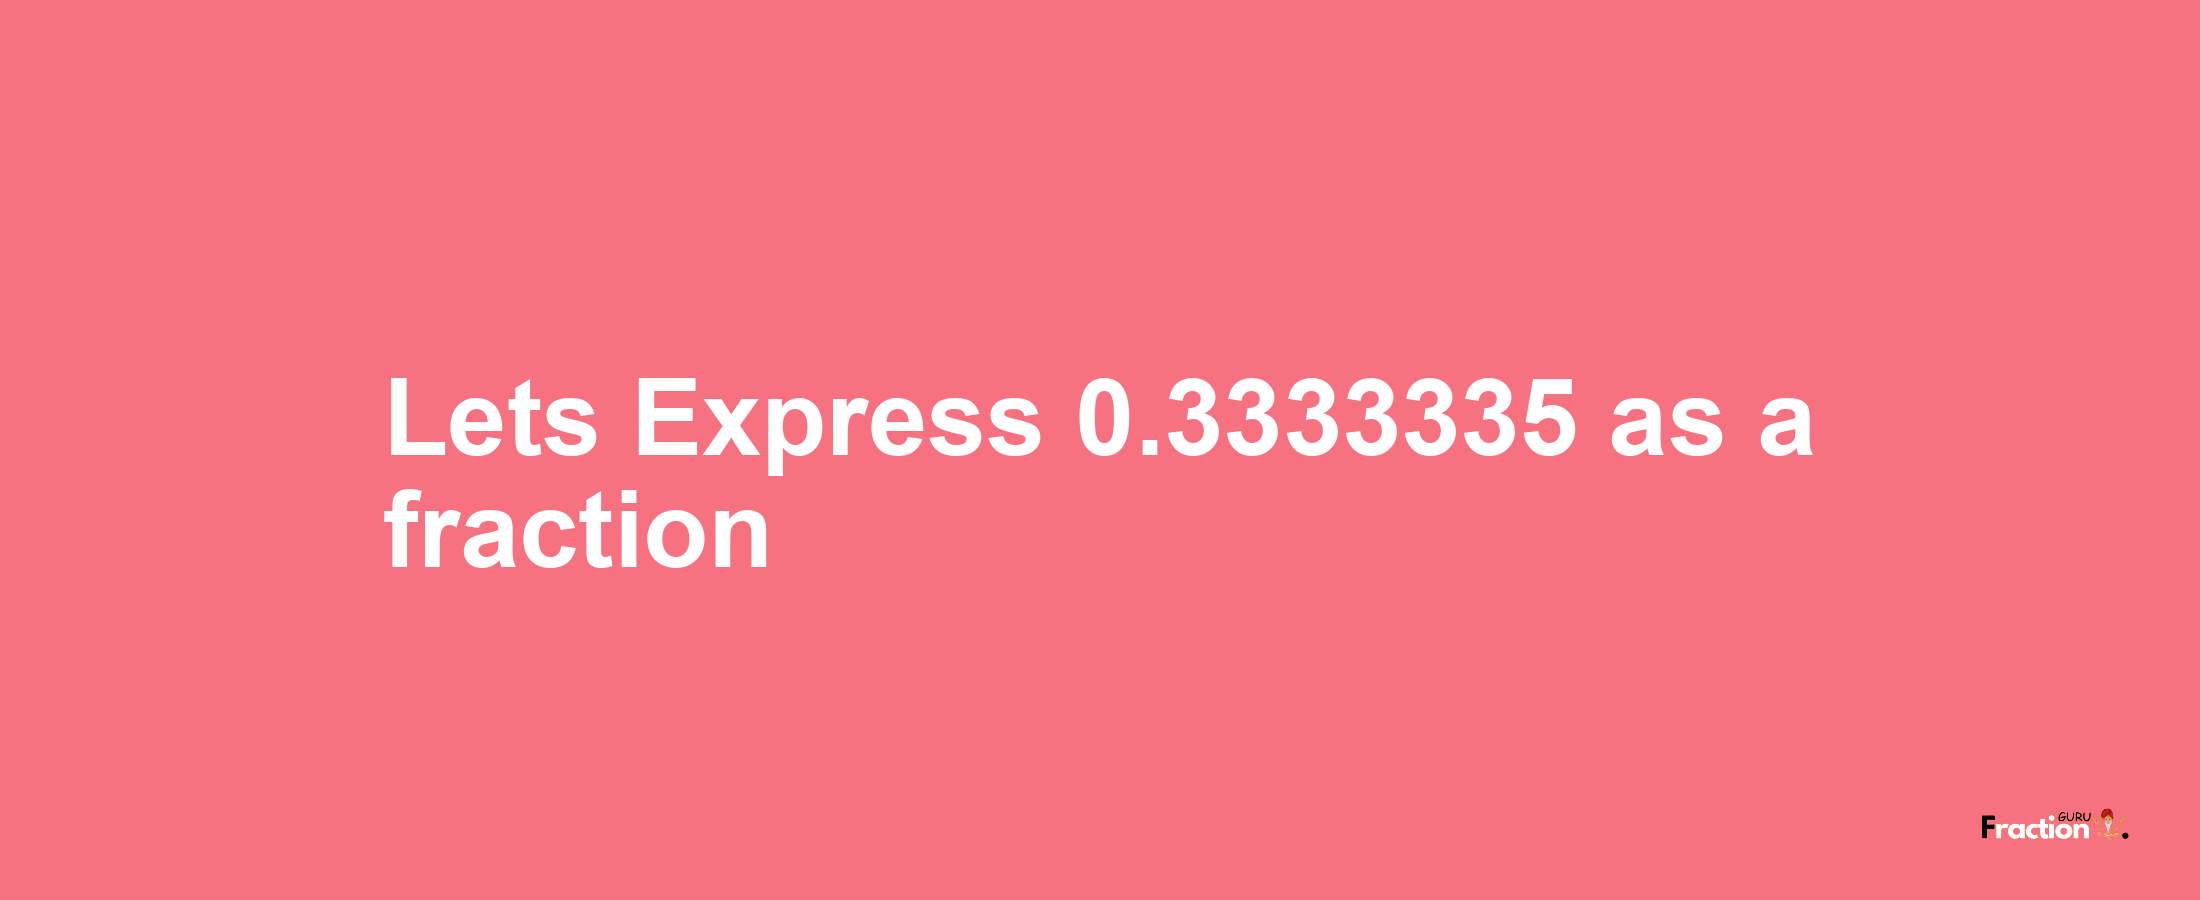 Lets Express 0.3333335 as afraction